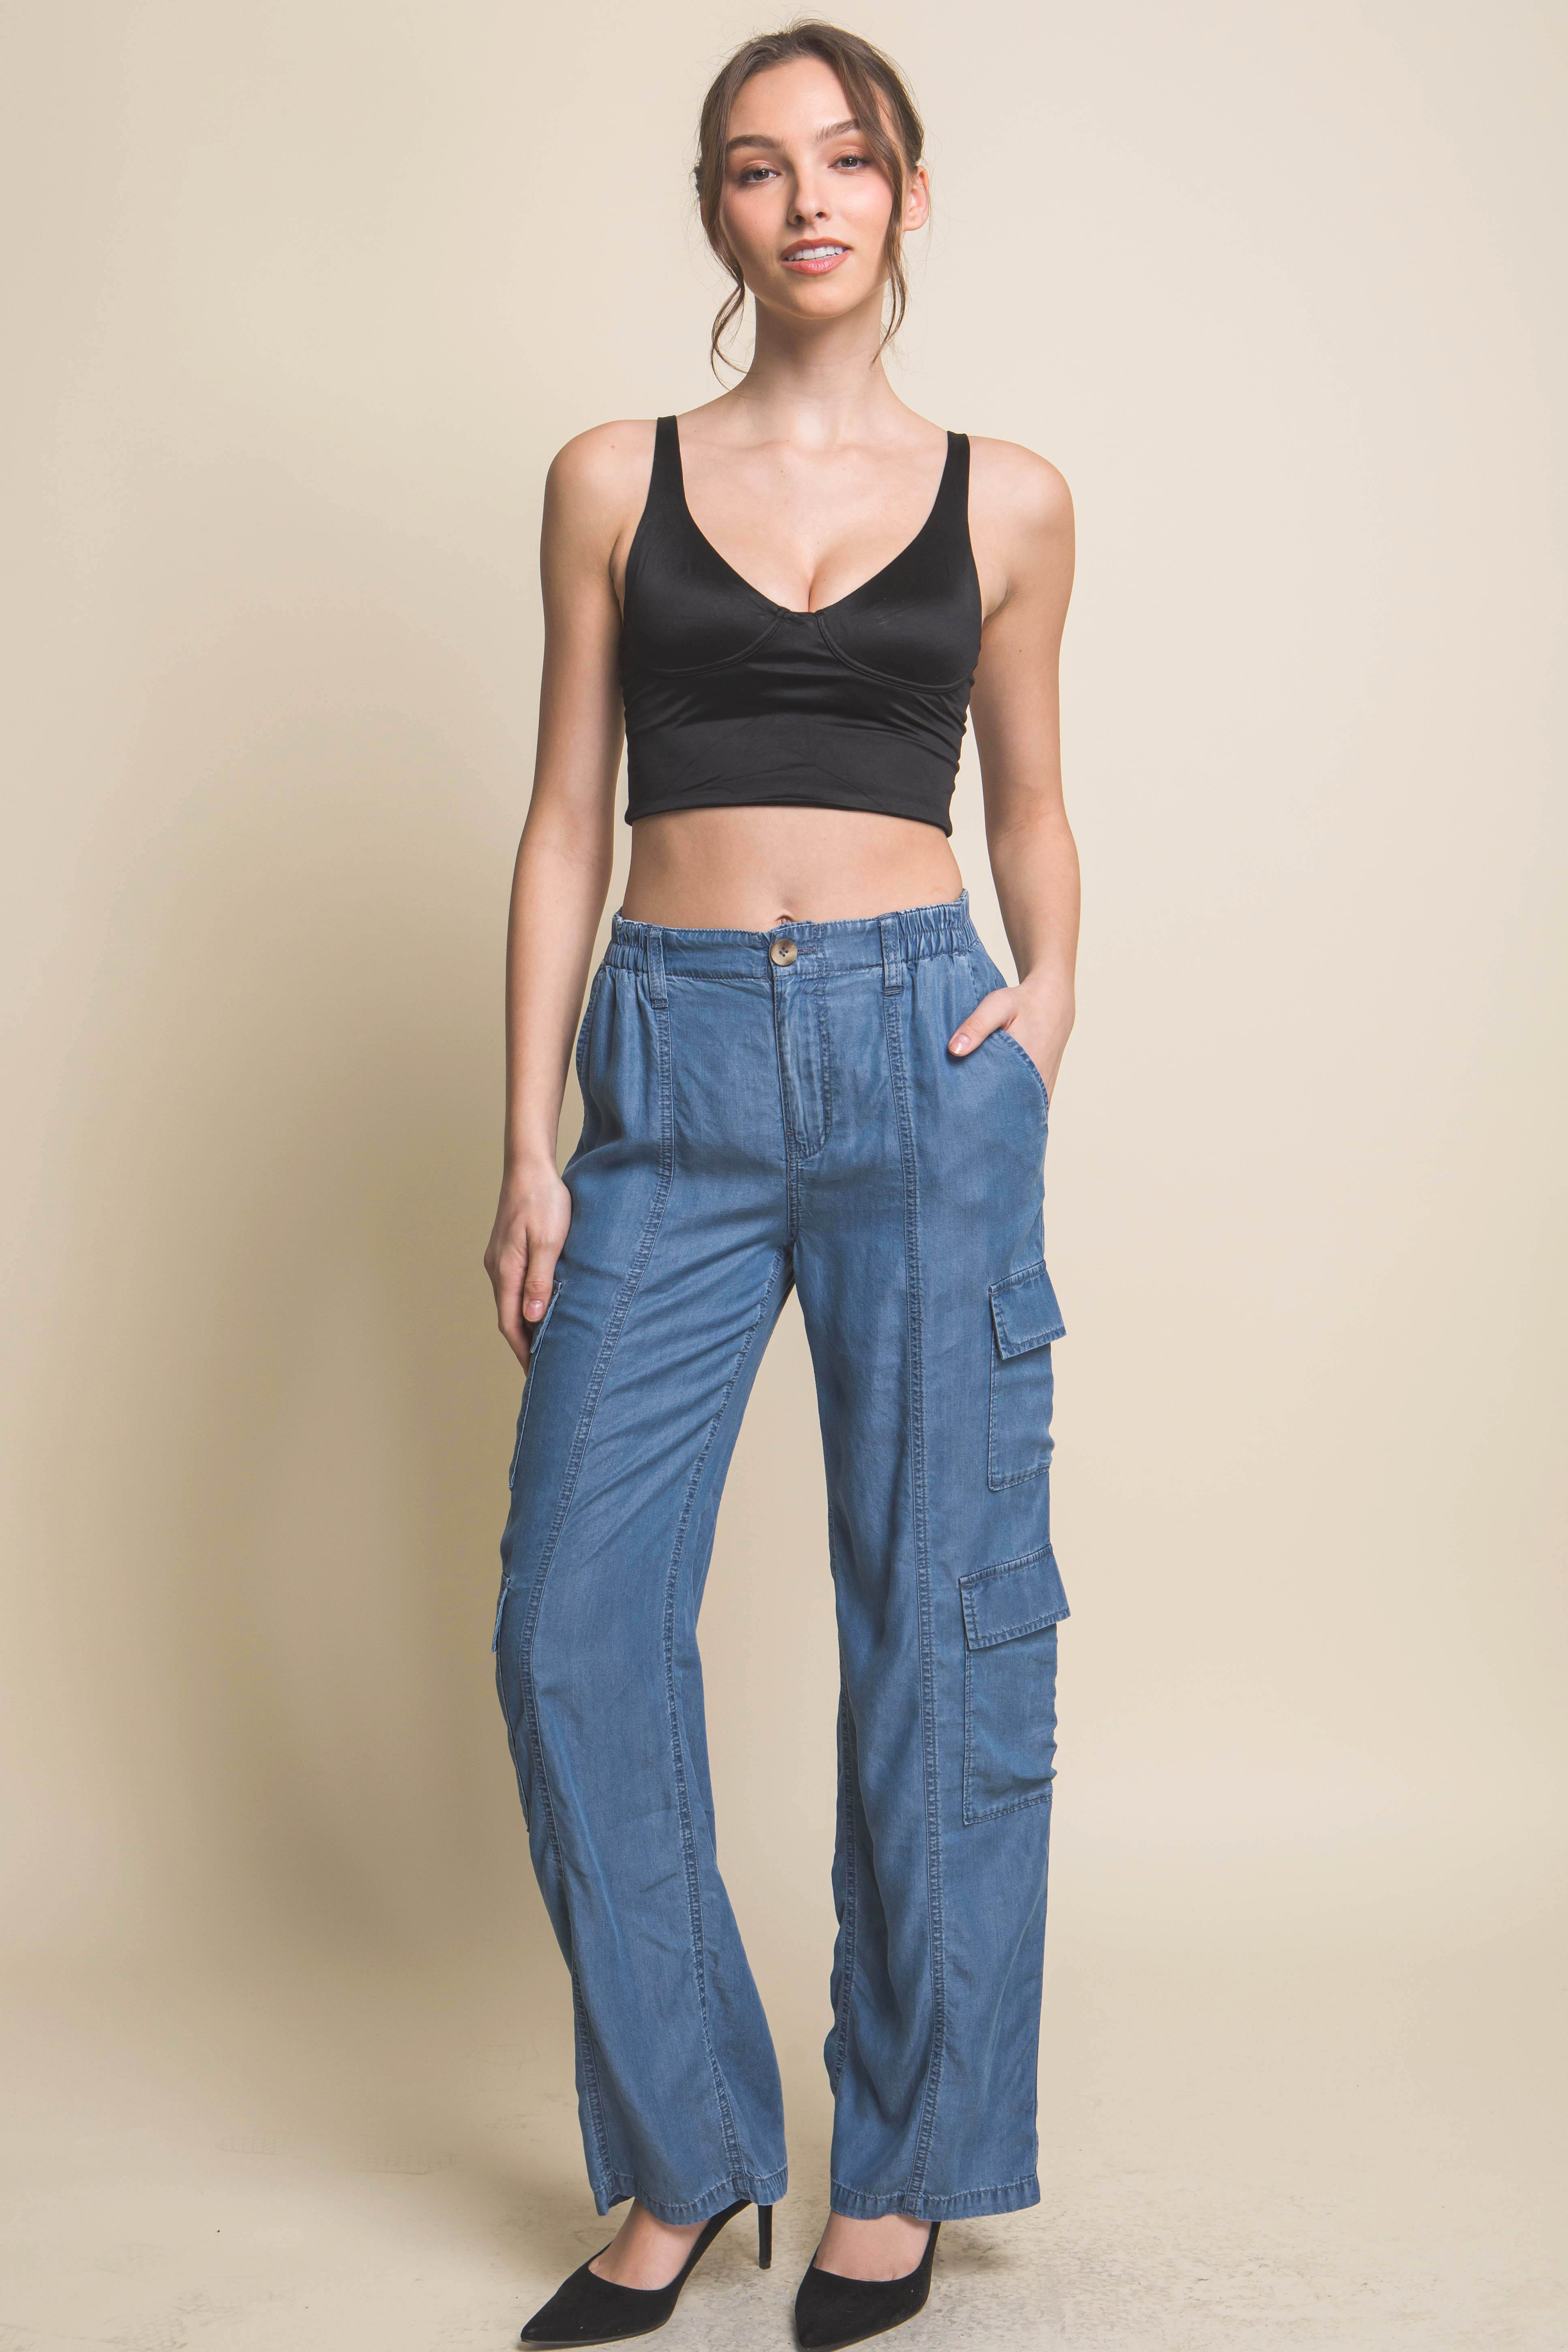 - Full-length Women's Tencel Pants With Cargo Pockets - womens pants at TFC&H Co.